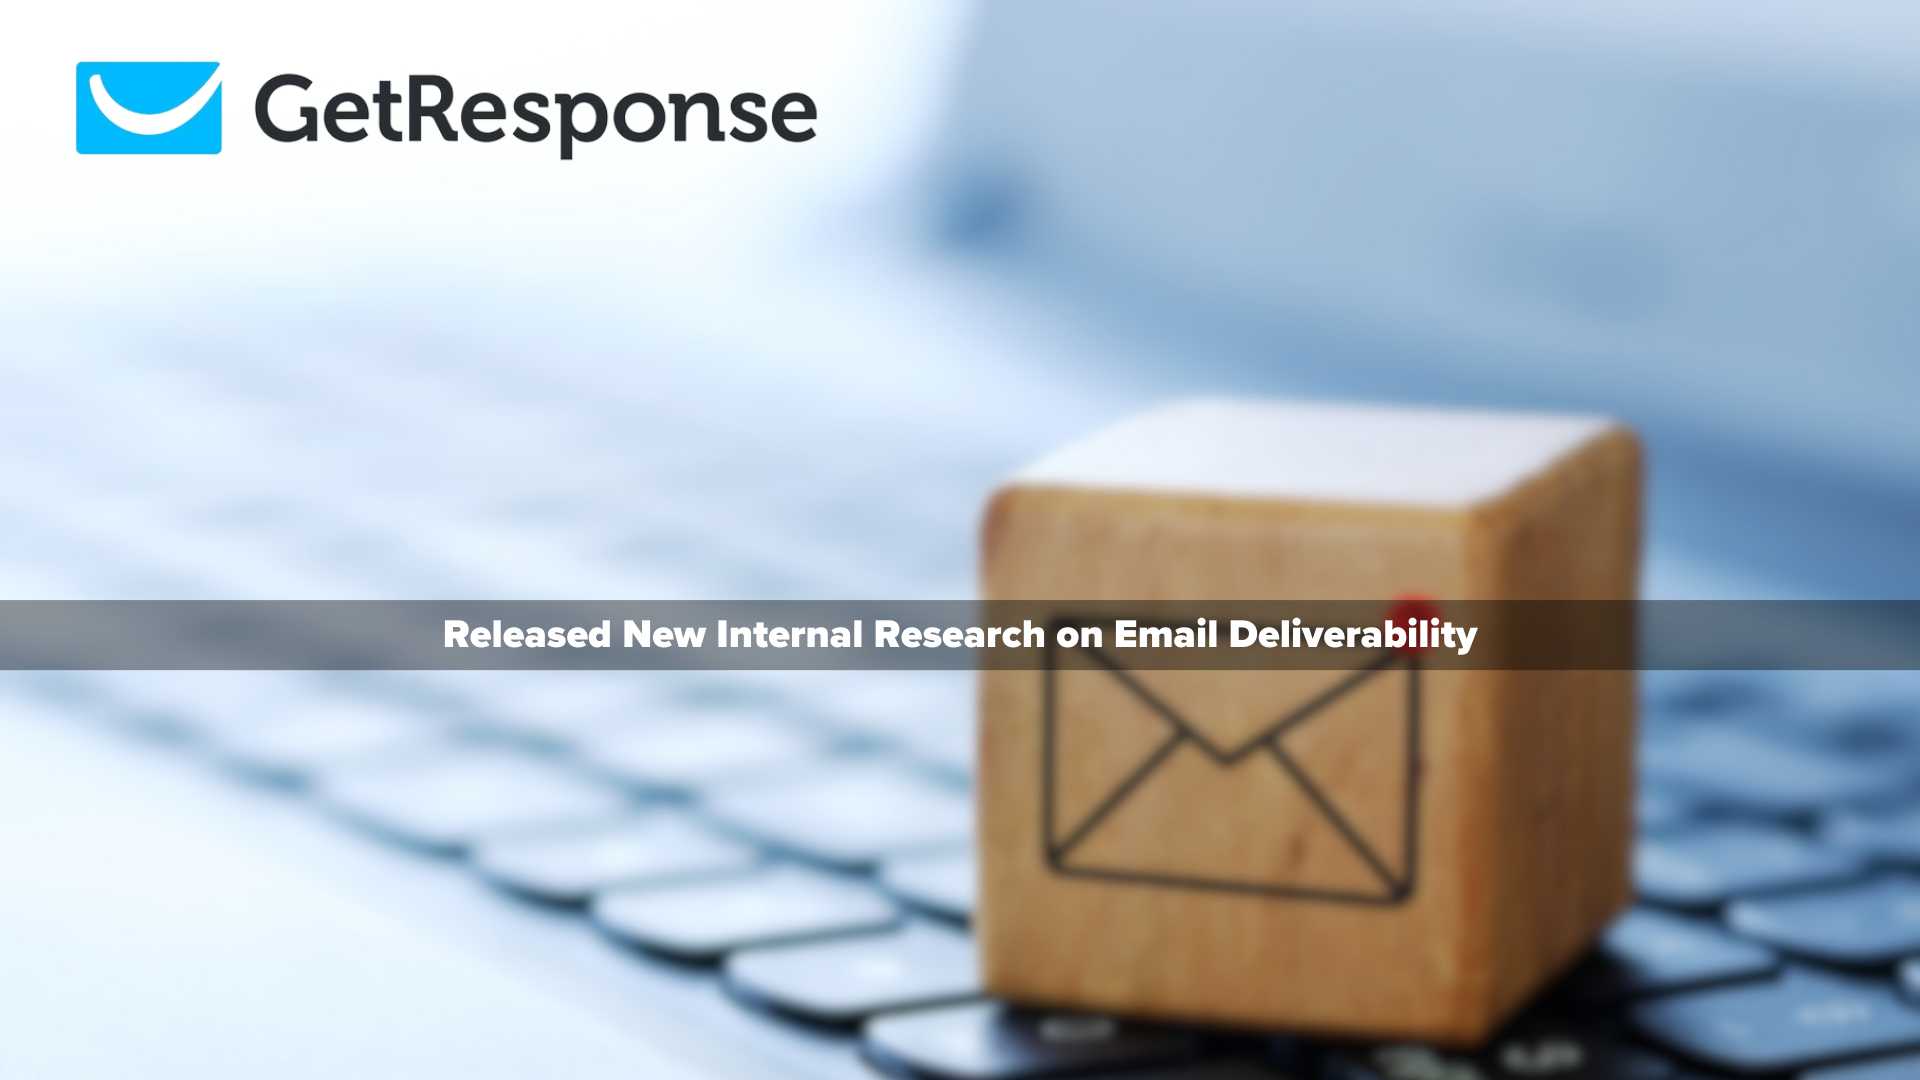 New Gmail and Yahoo authentication changes - GetResponse explores the real impact for businesses with new email deliverability research